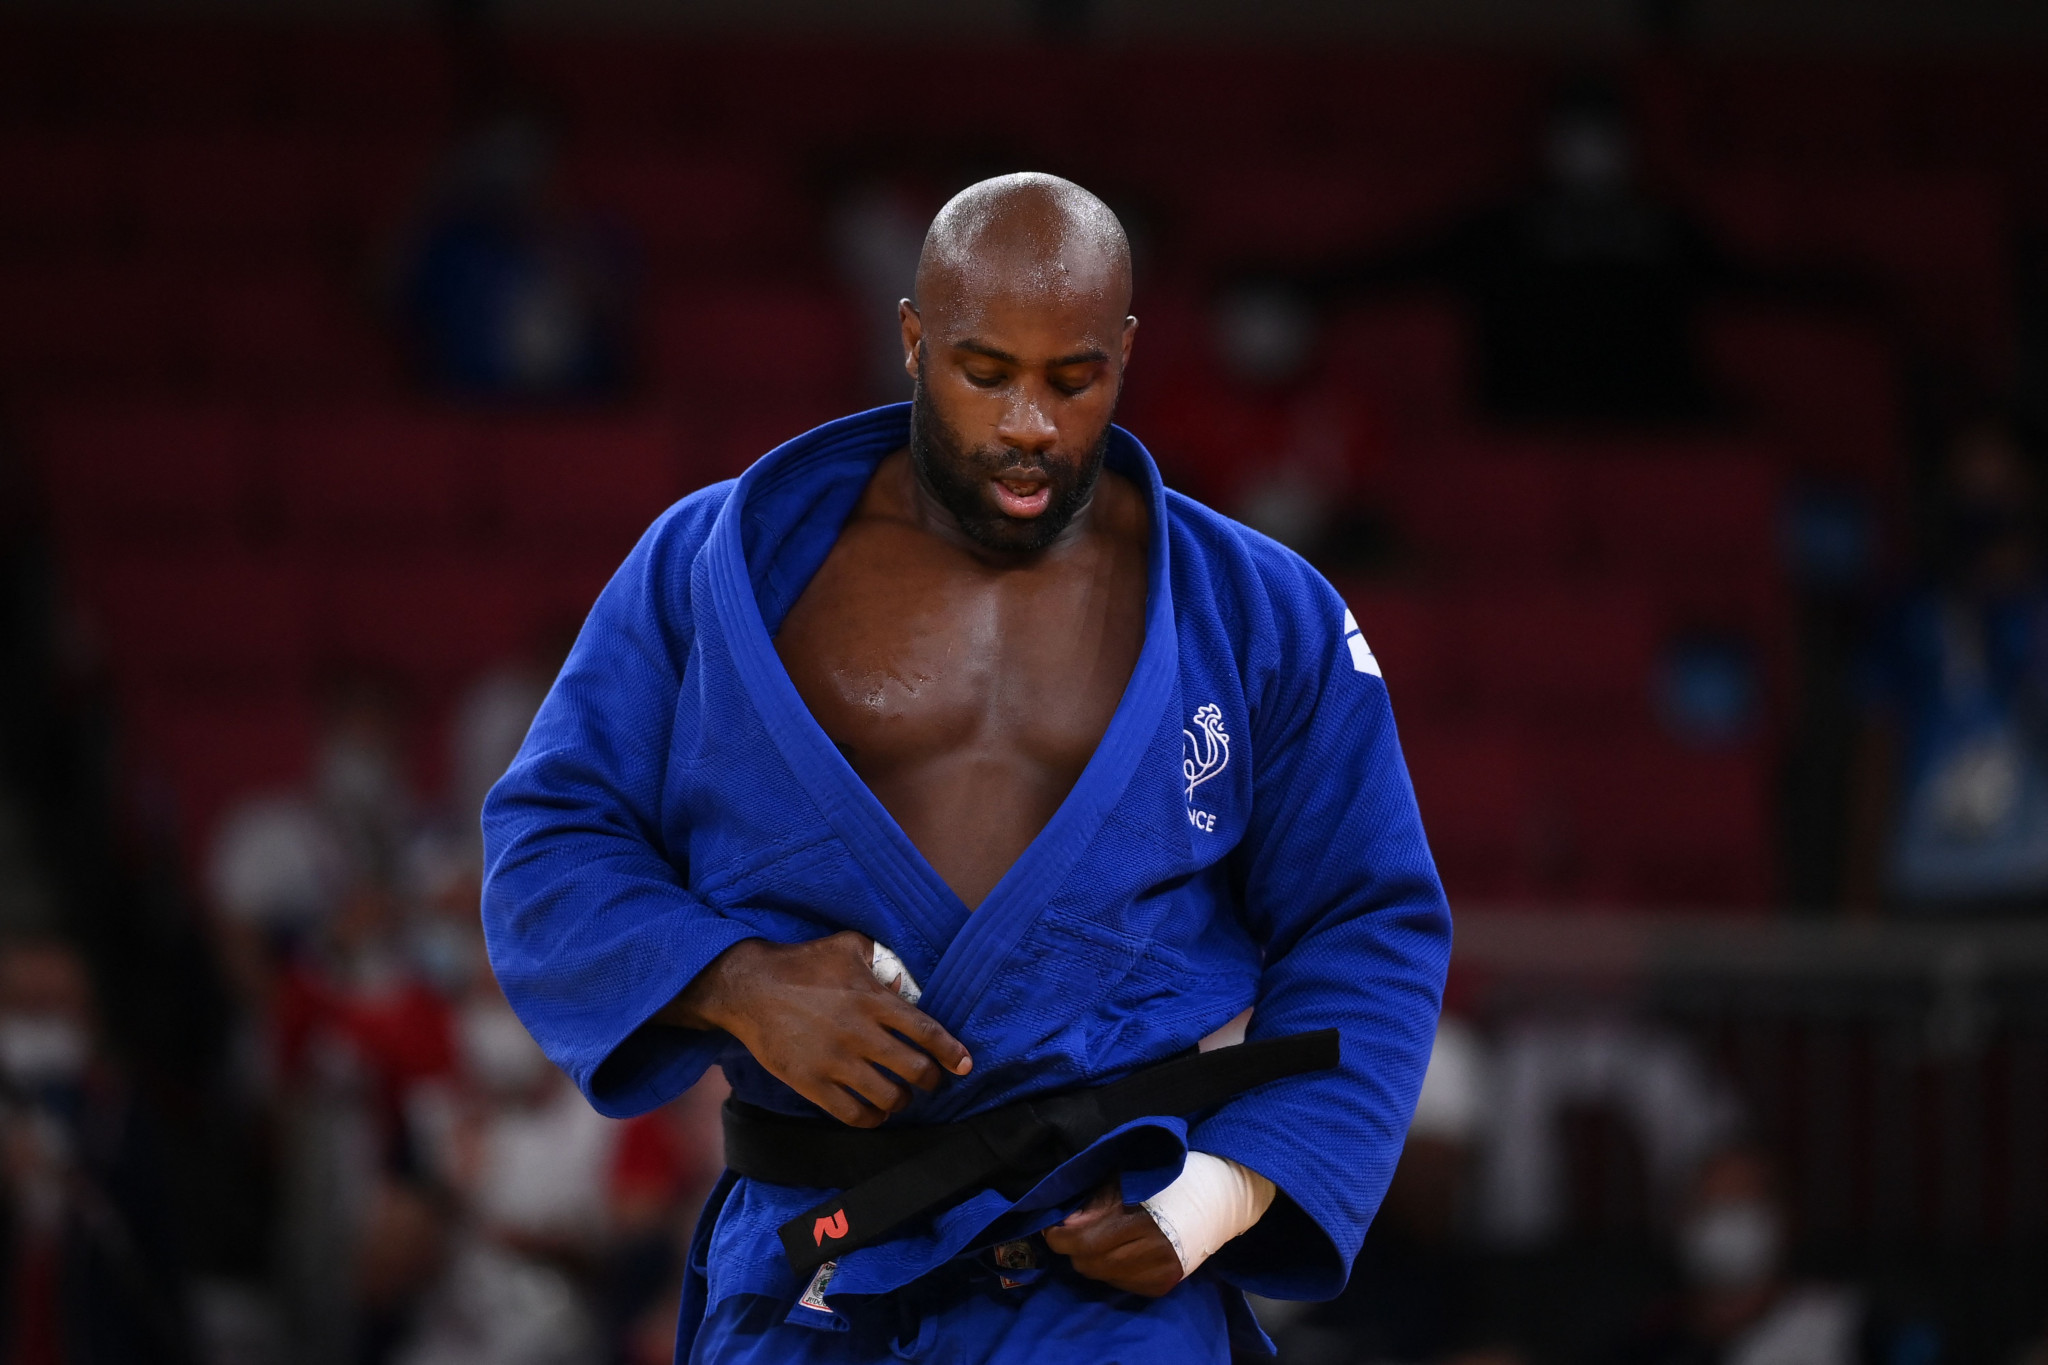 Teddy Riner will be seeking to win a third Olympic gold medal in the heavyweight category at Paris 2024 ©Getty Images